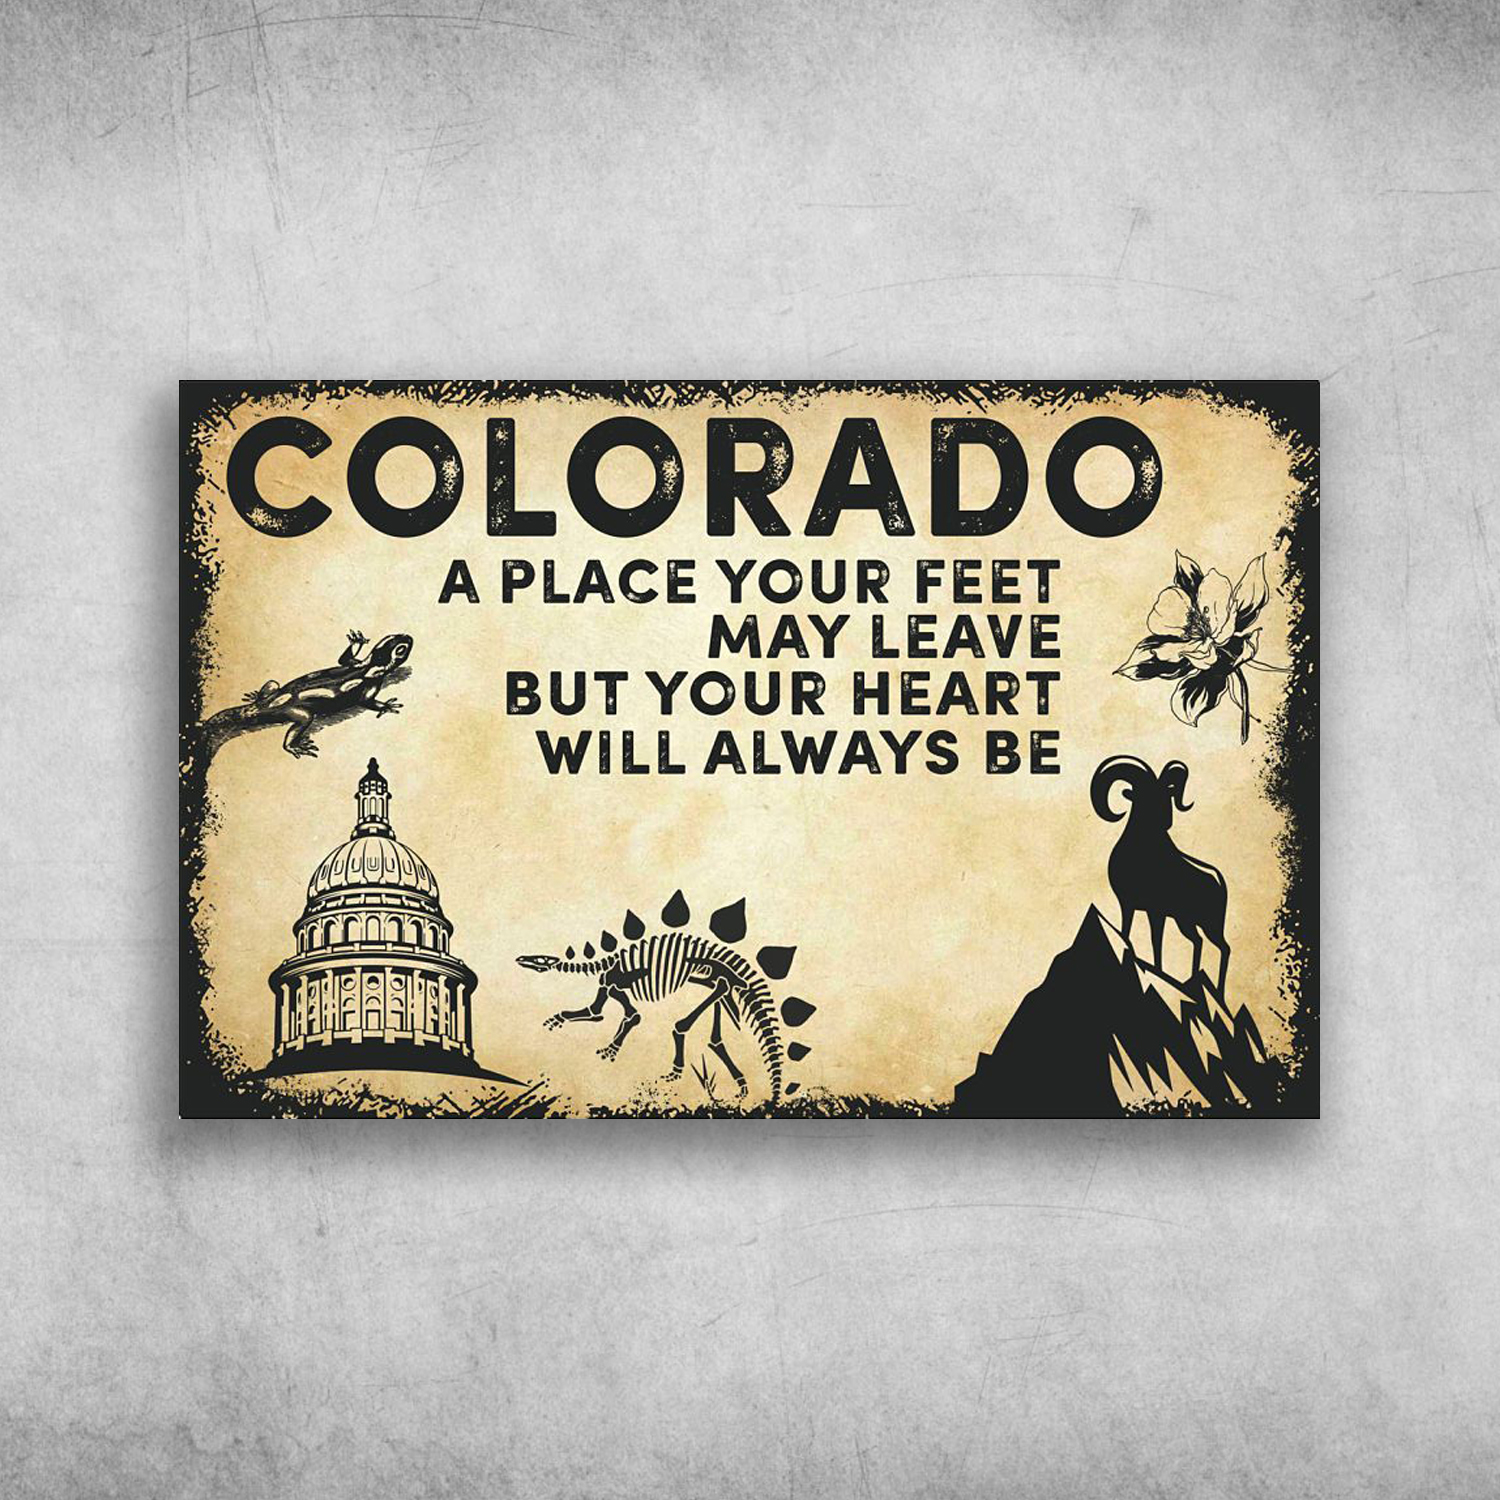 Colorado America A Place Your Feet May Leave